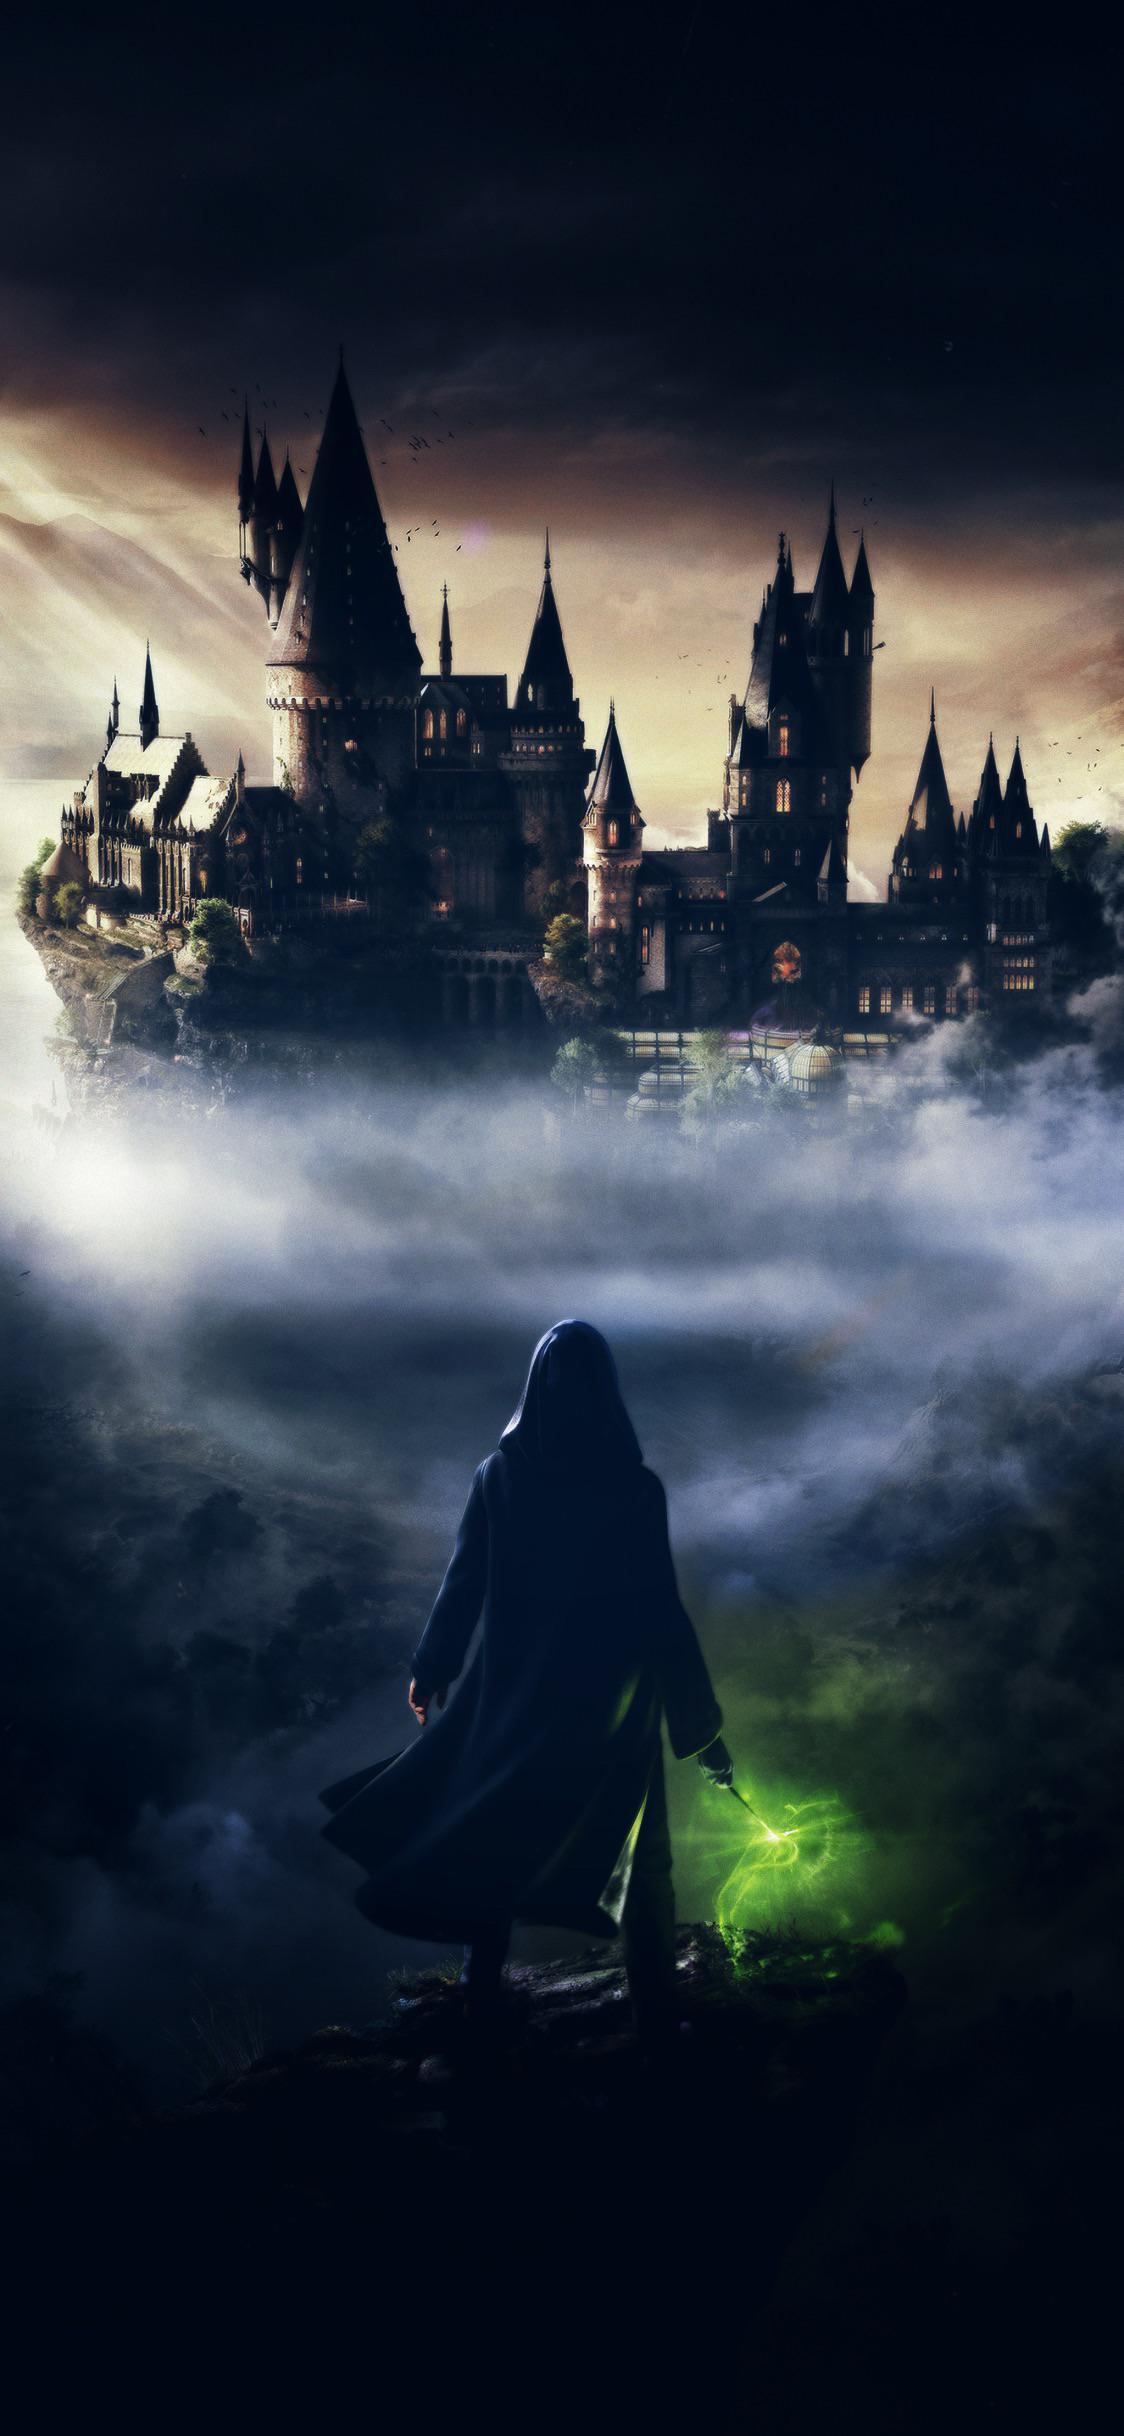 i made a dark wizard edit as a phone wallpaper!: HarryPotterGame